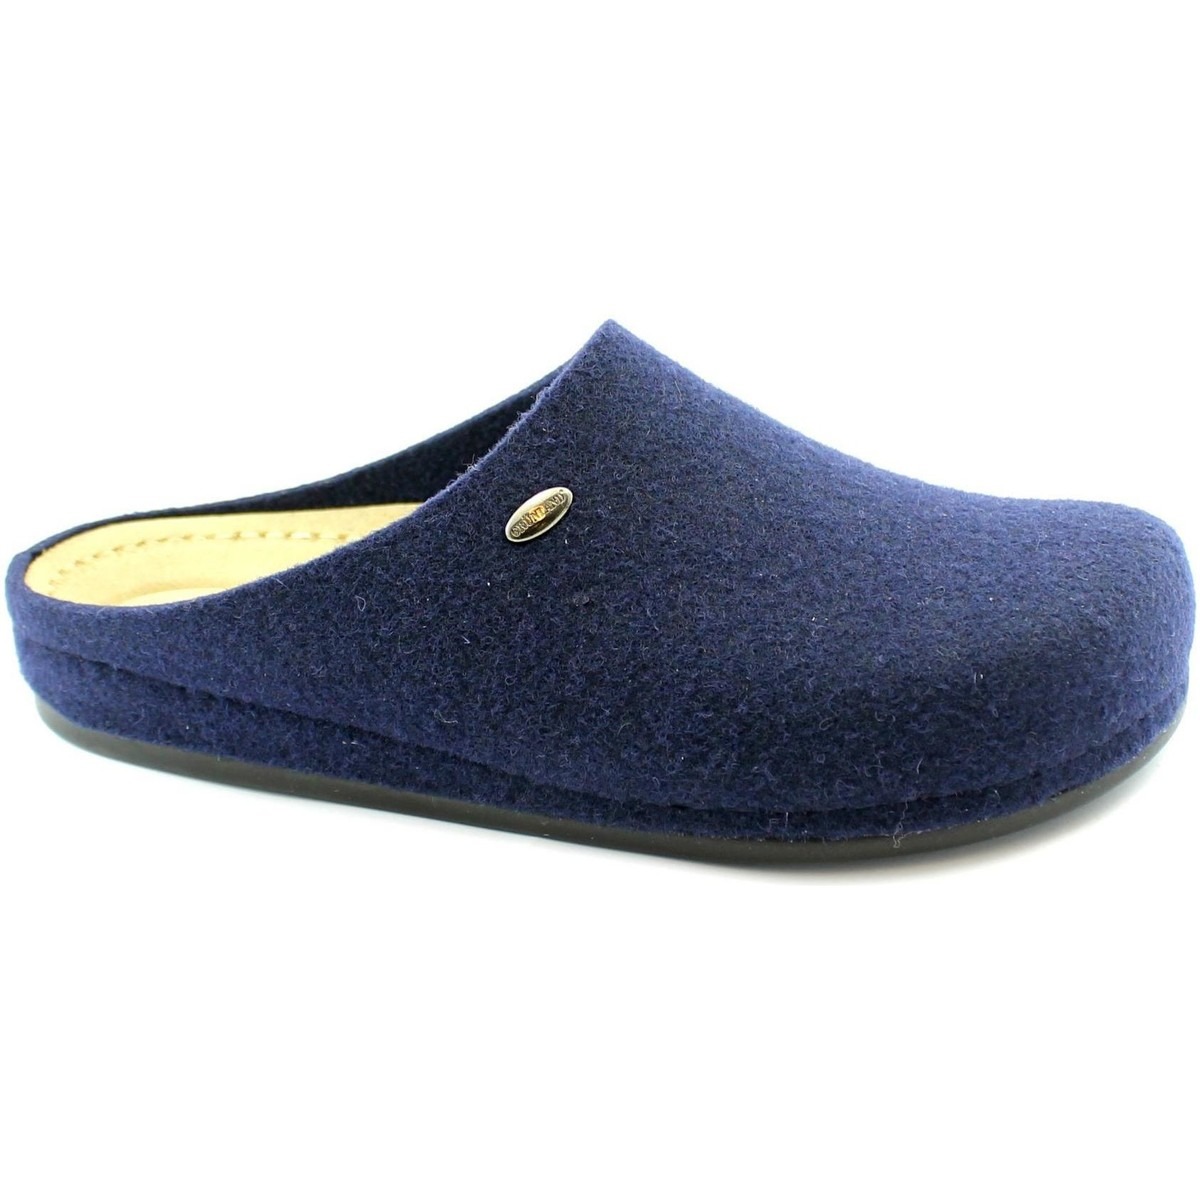 Spartoo Blue Slippers for Man from Grunland GOOFASH